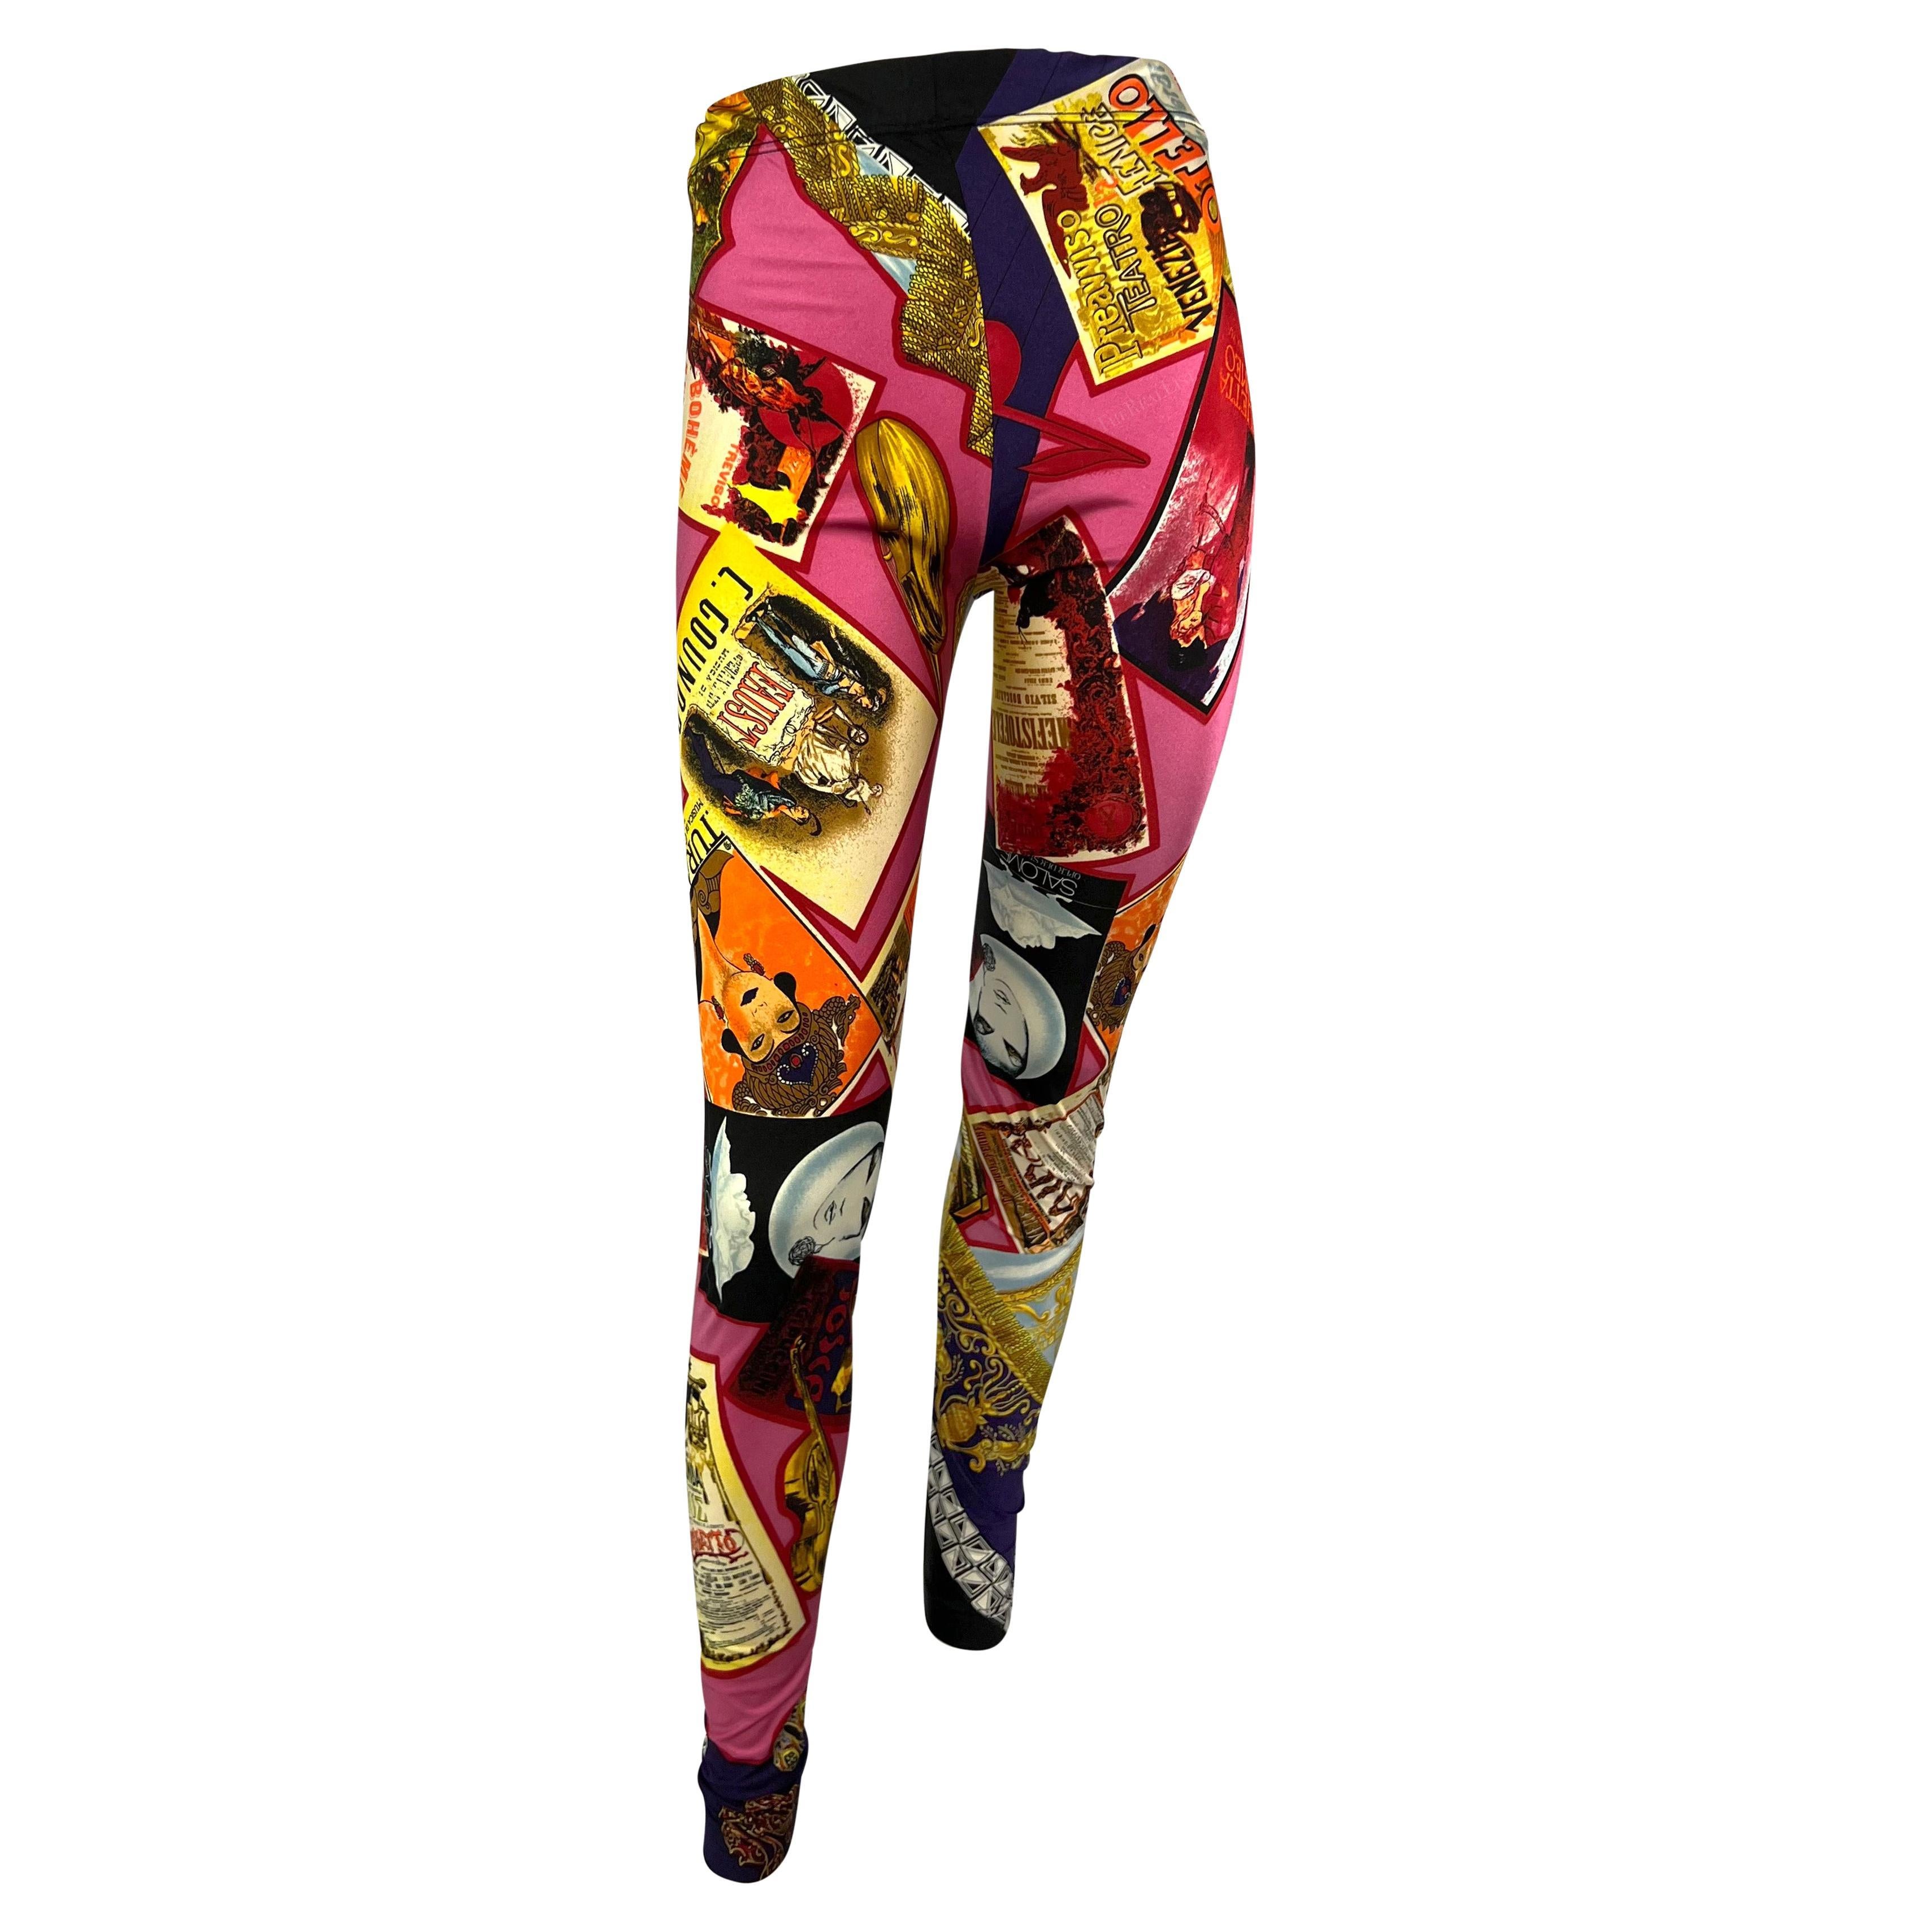 1991 Gianni Versace Opera Playbill Print Pink Tights Legging Pants For Sale